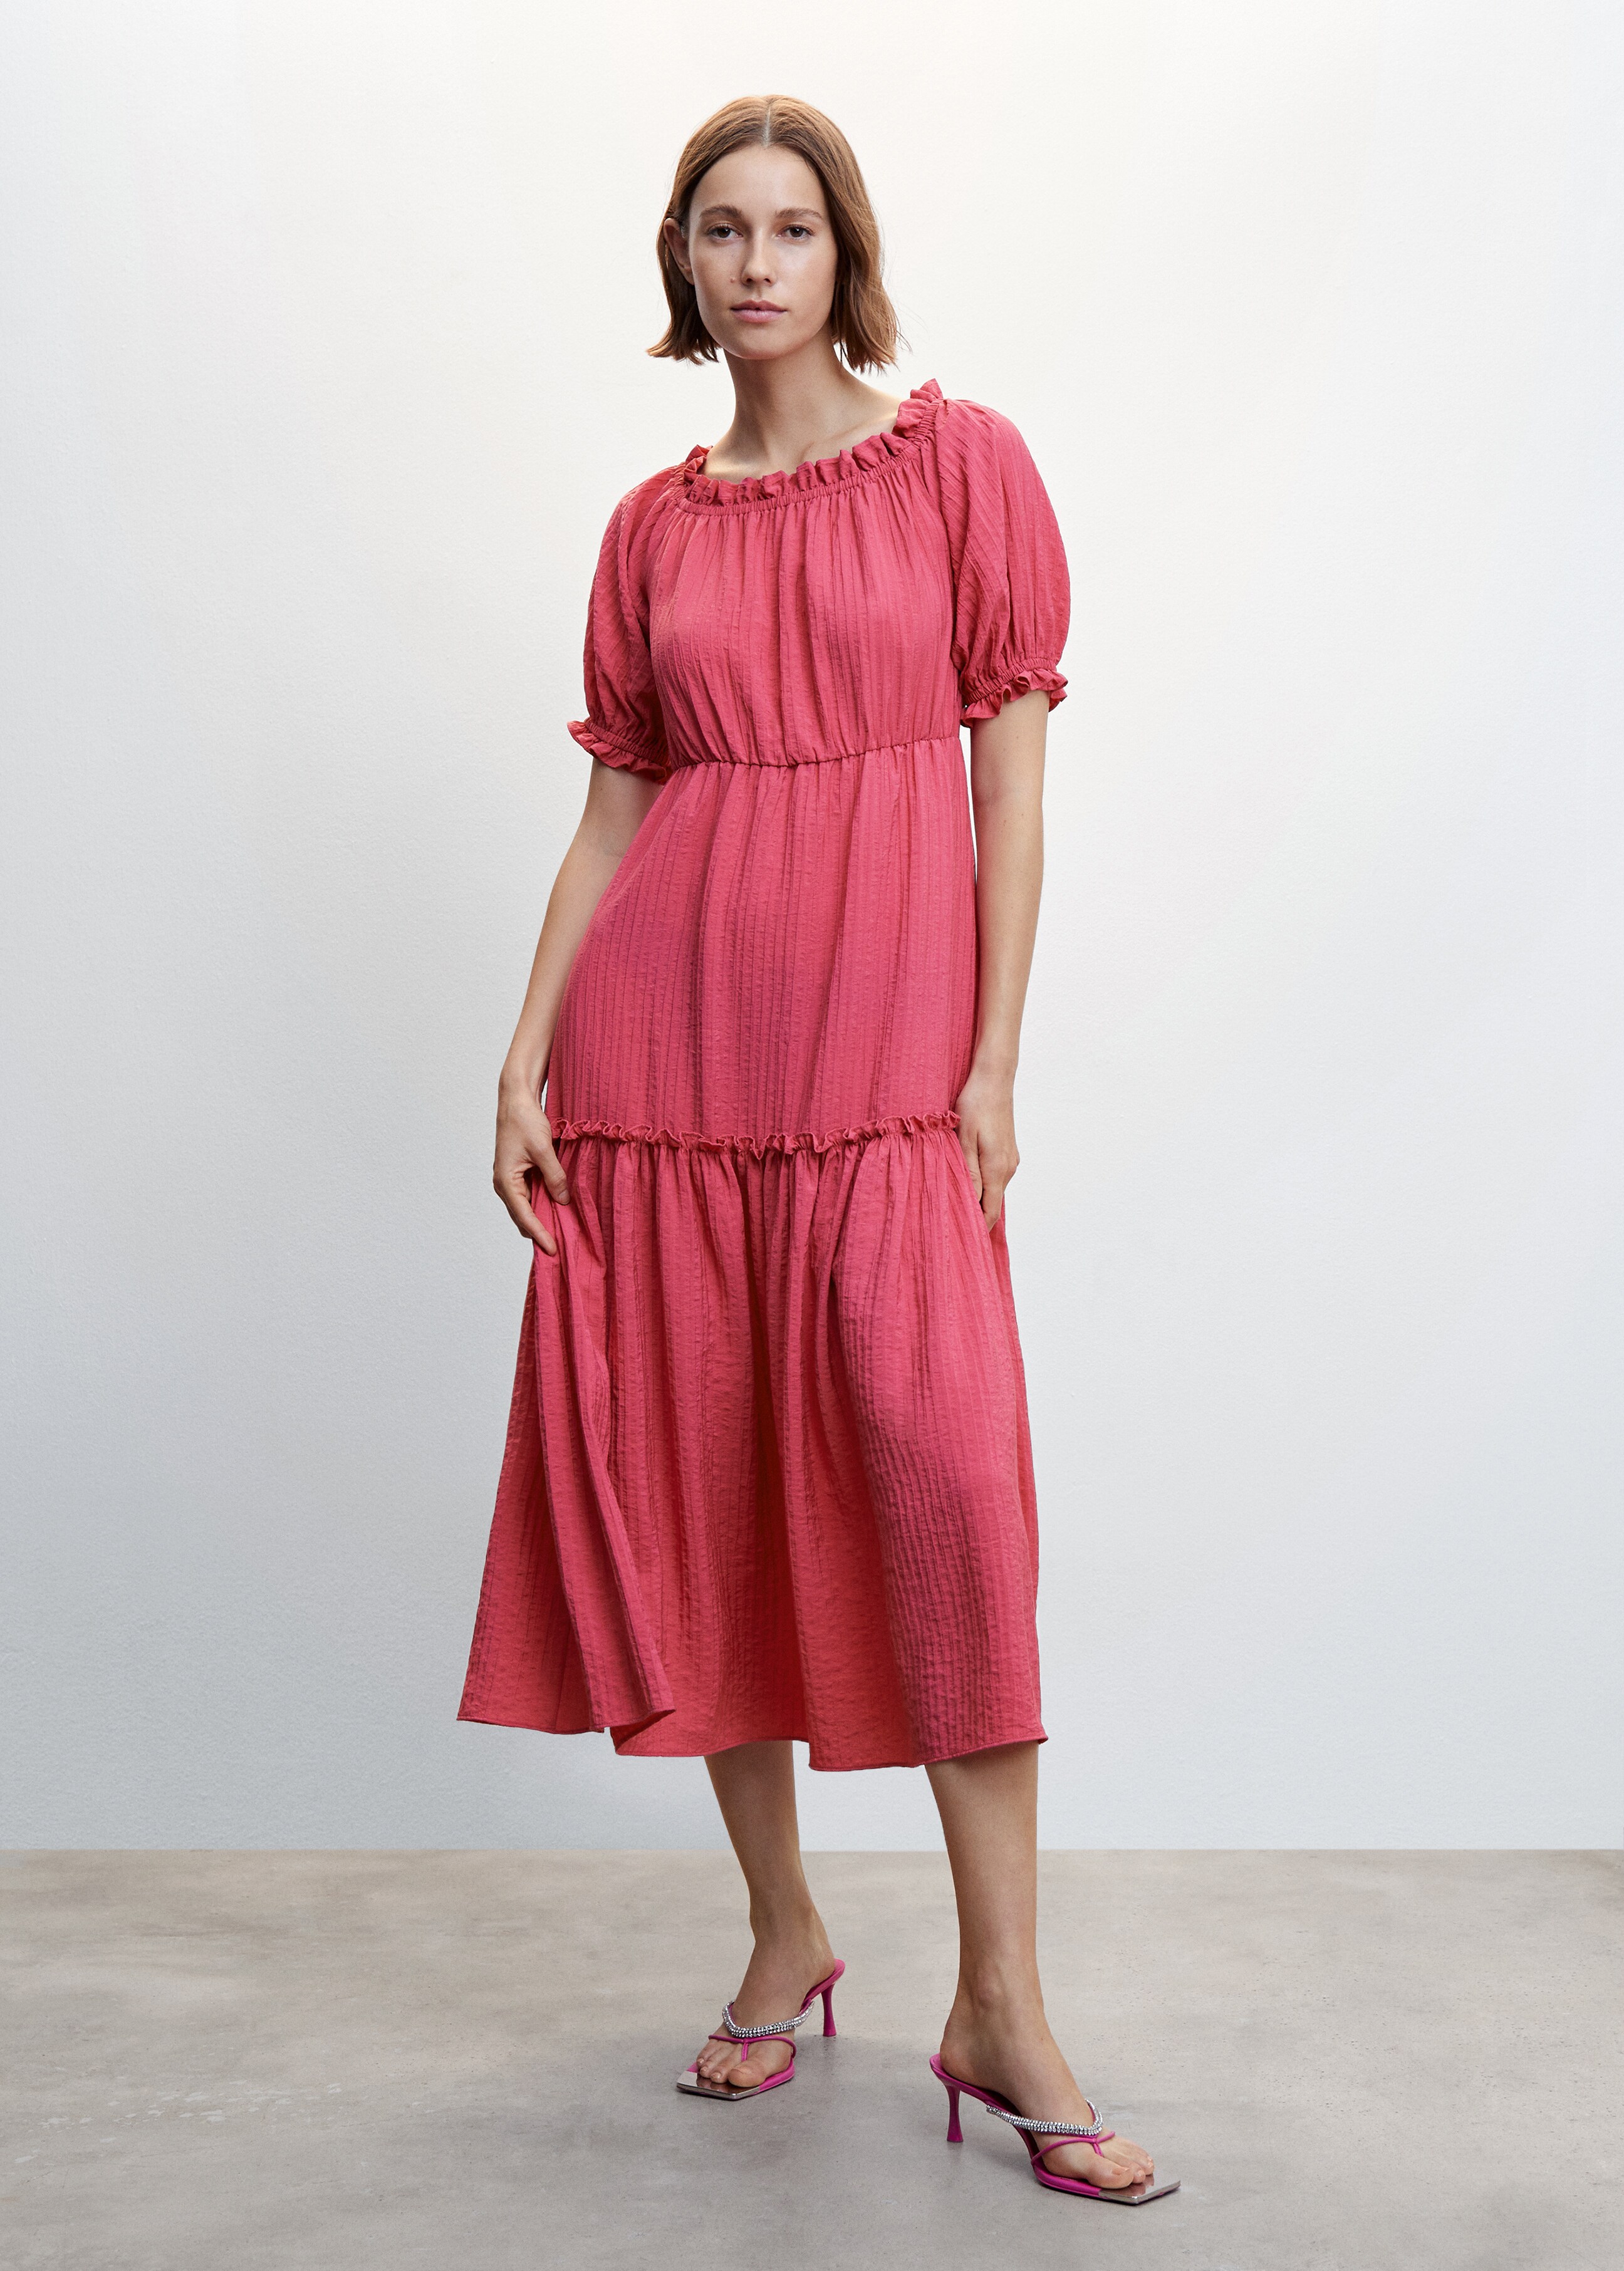 Puffed sleeves texture dress - General plane